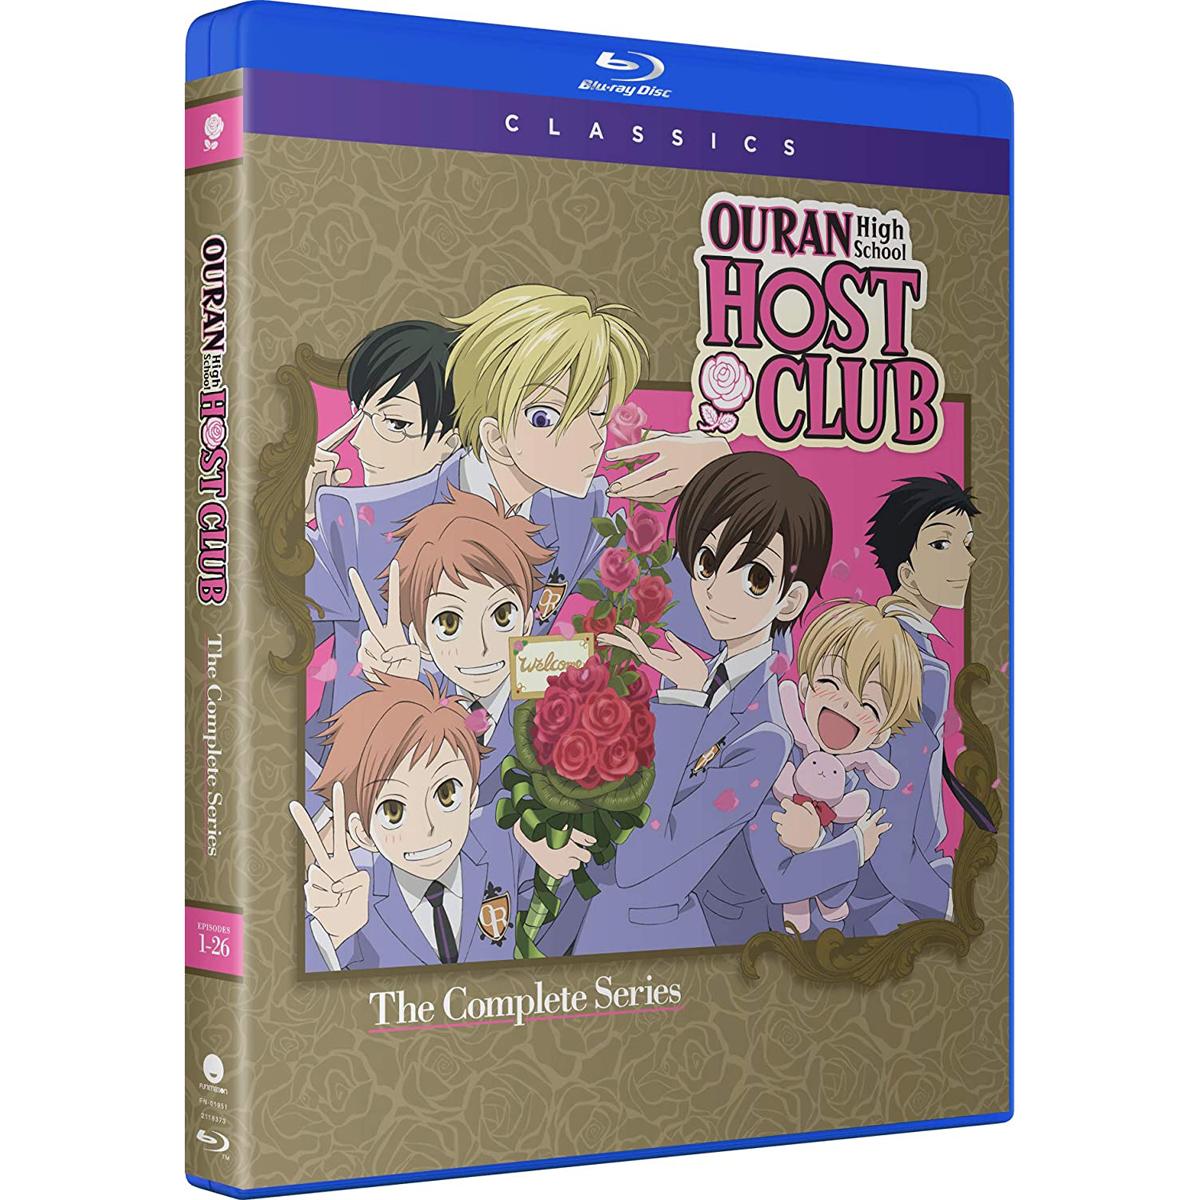 Ouran High School Host Club The Complete Series Blu-ray for $29.99 Shipped